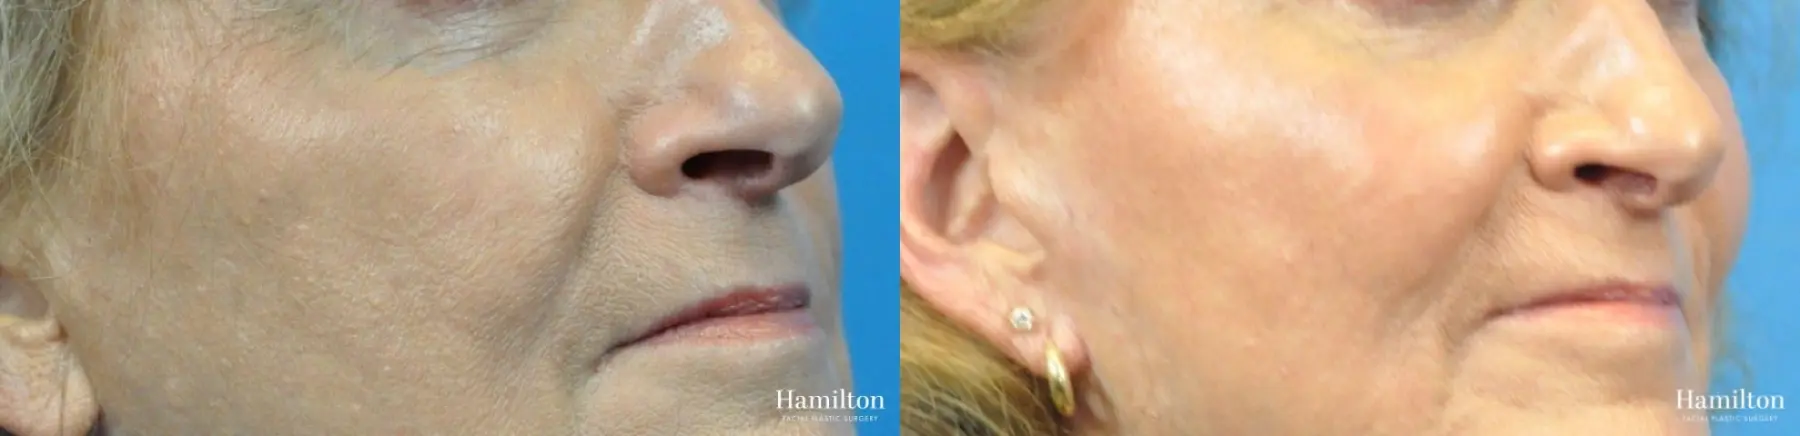 Cheek Augmentation: Patient 1 - Before and After 1